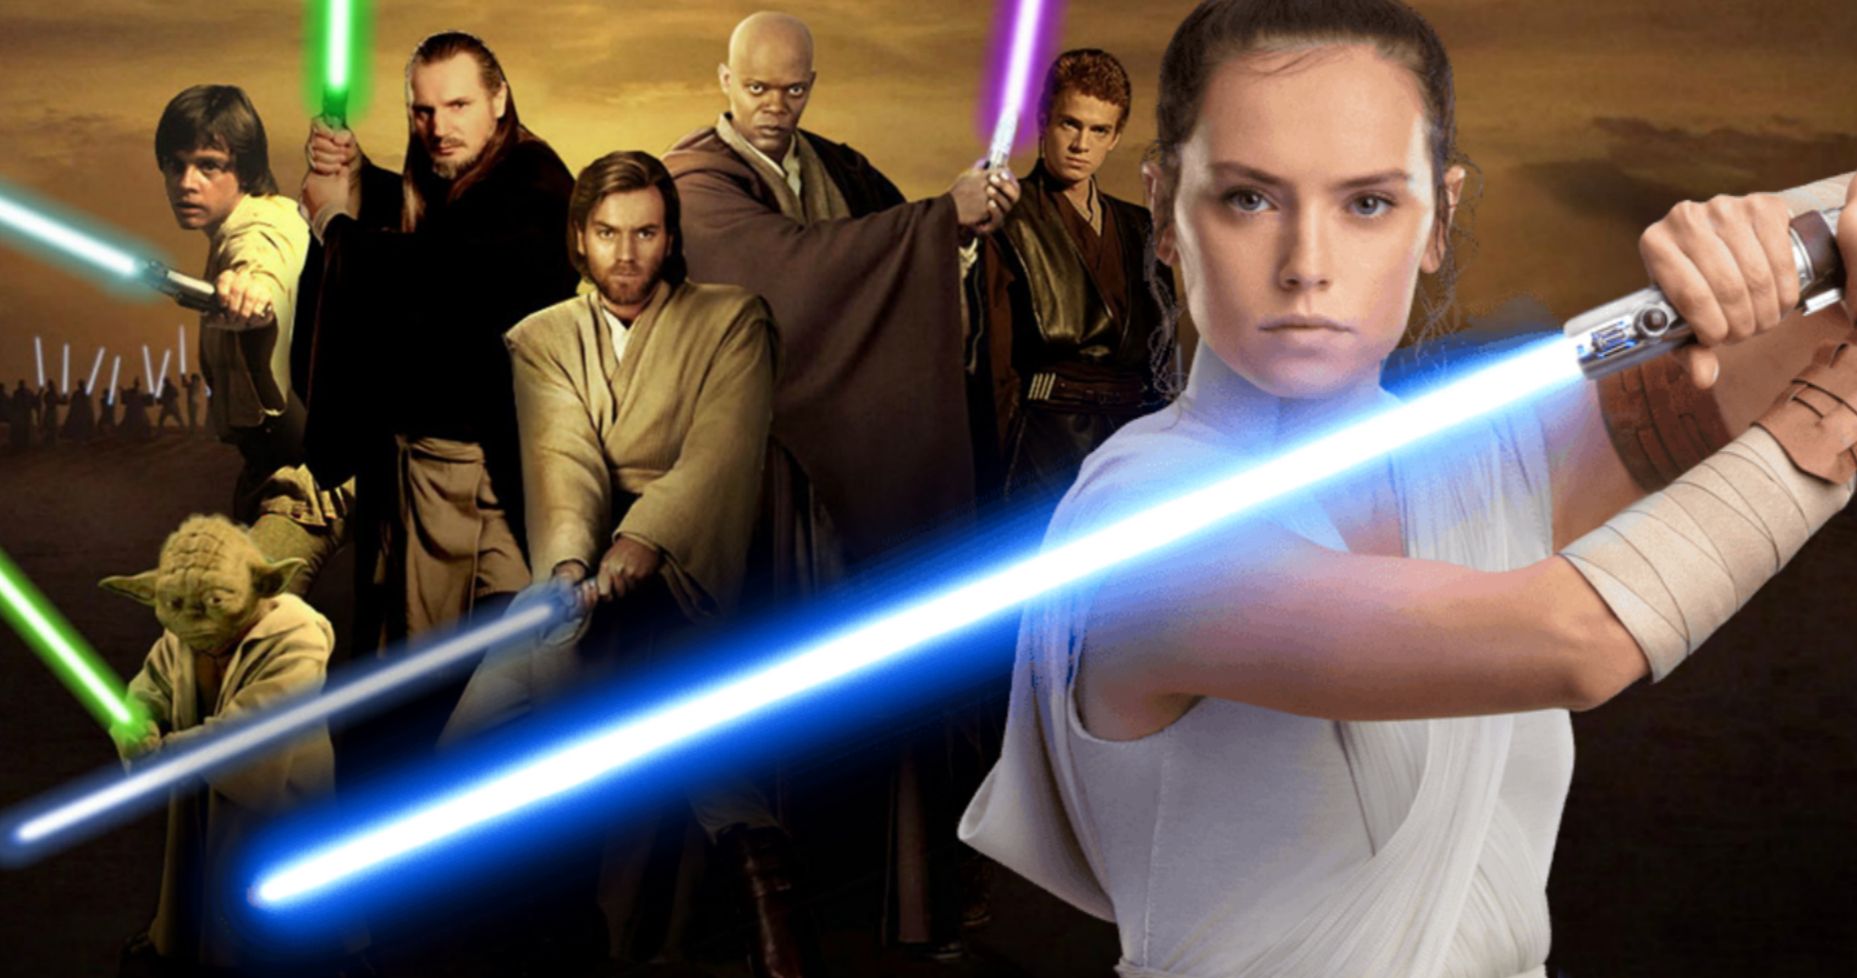 #Explained: What is a Jedi?